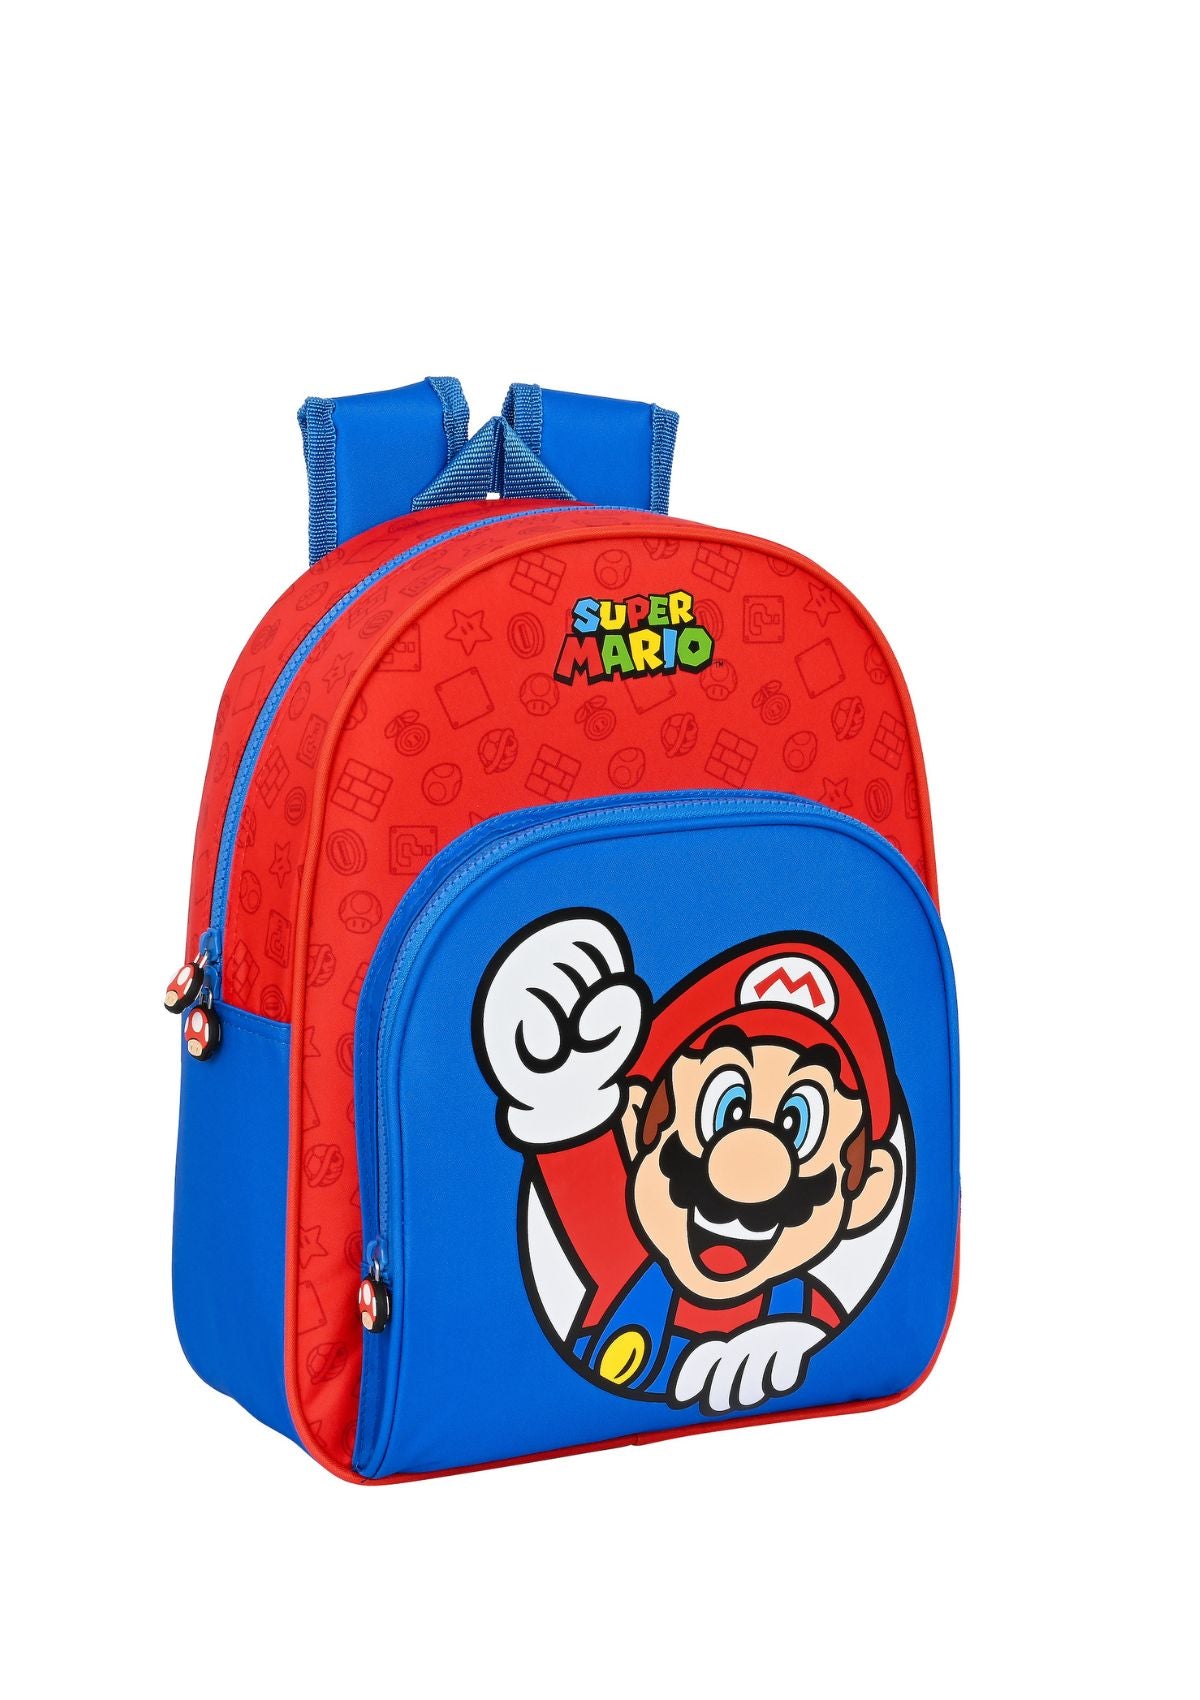 Super Mario Small Backpack front